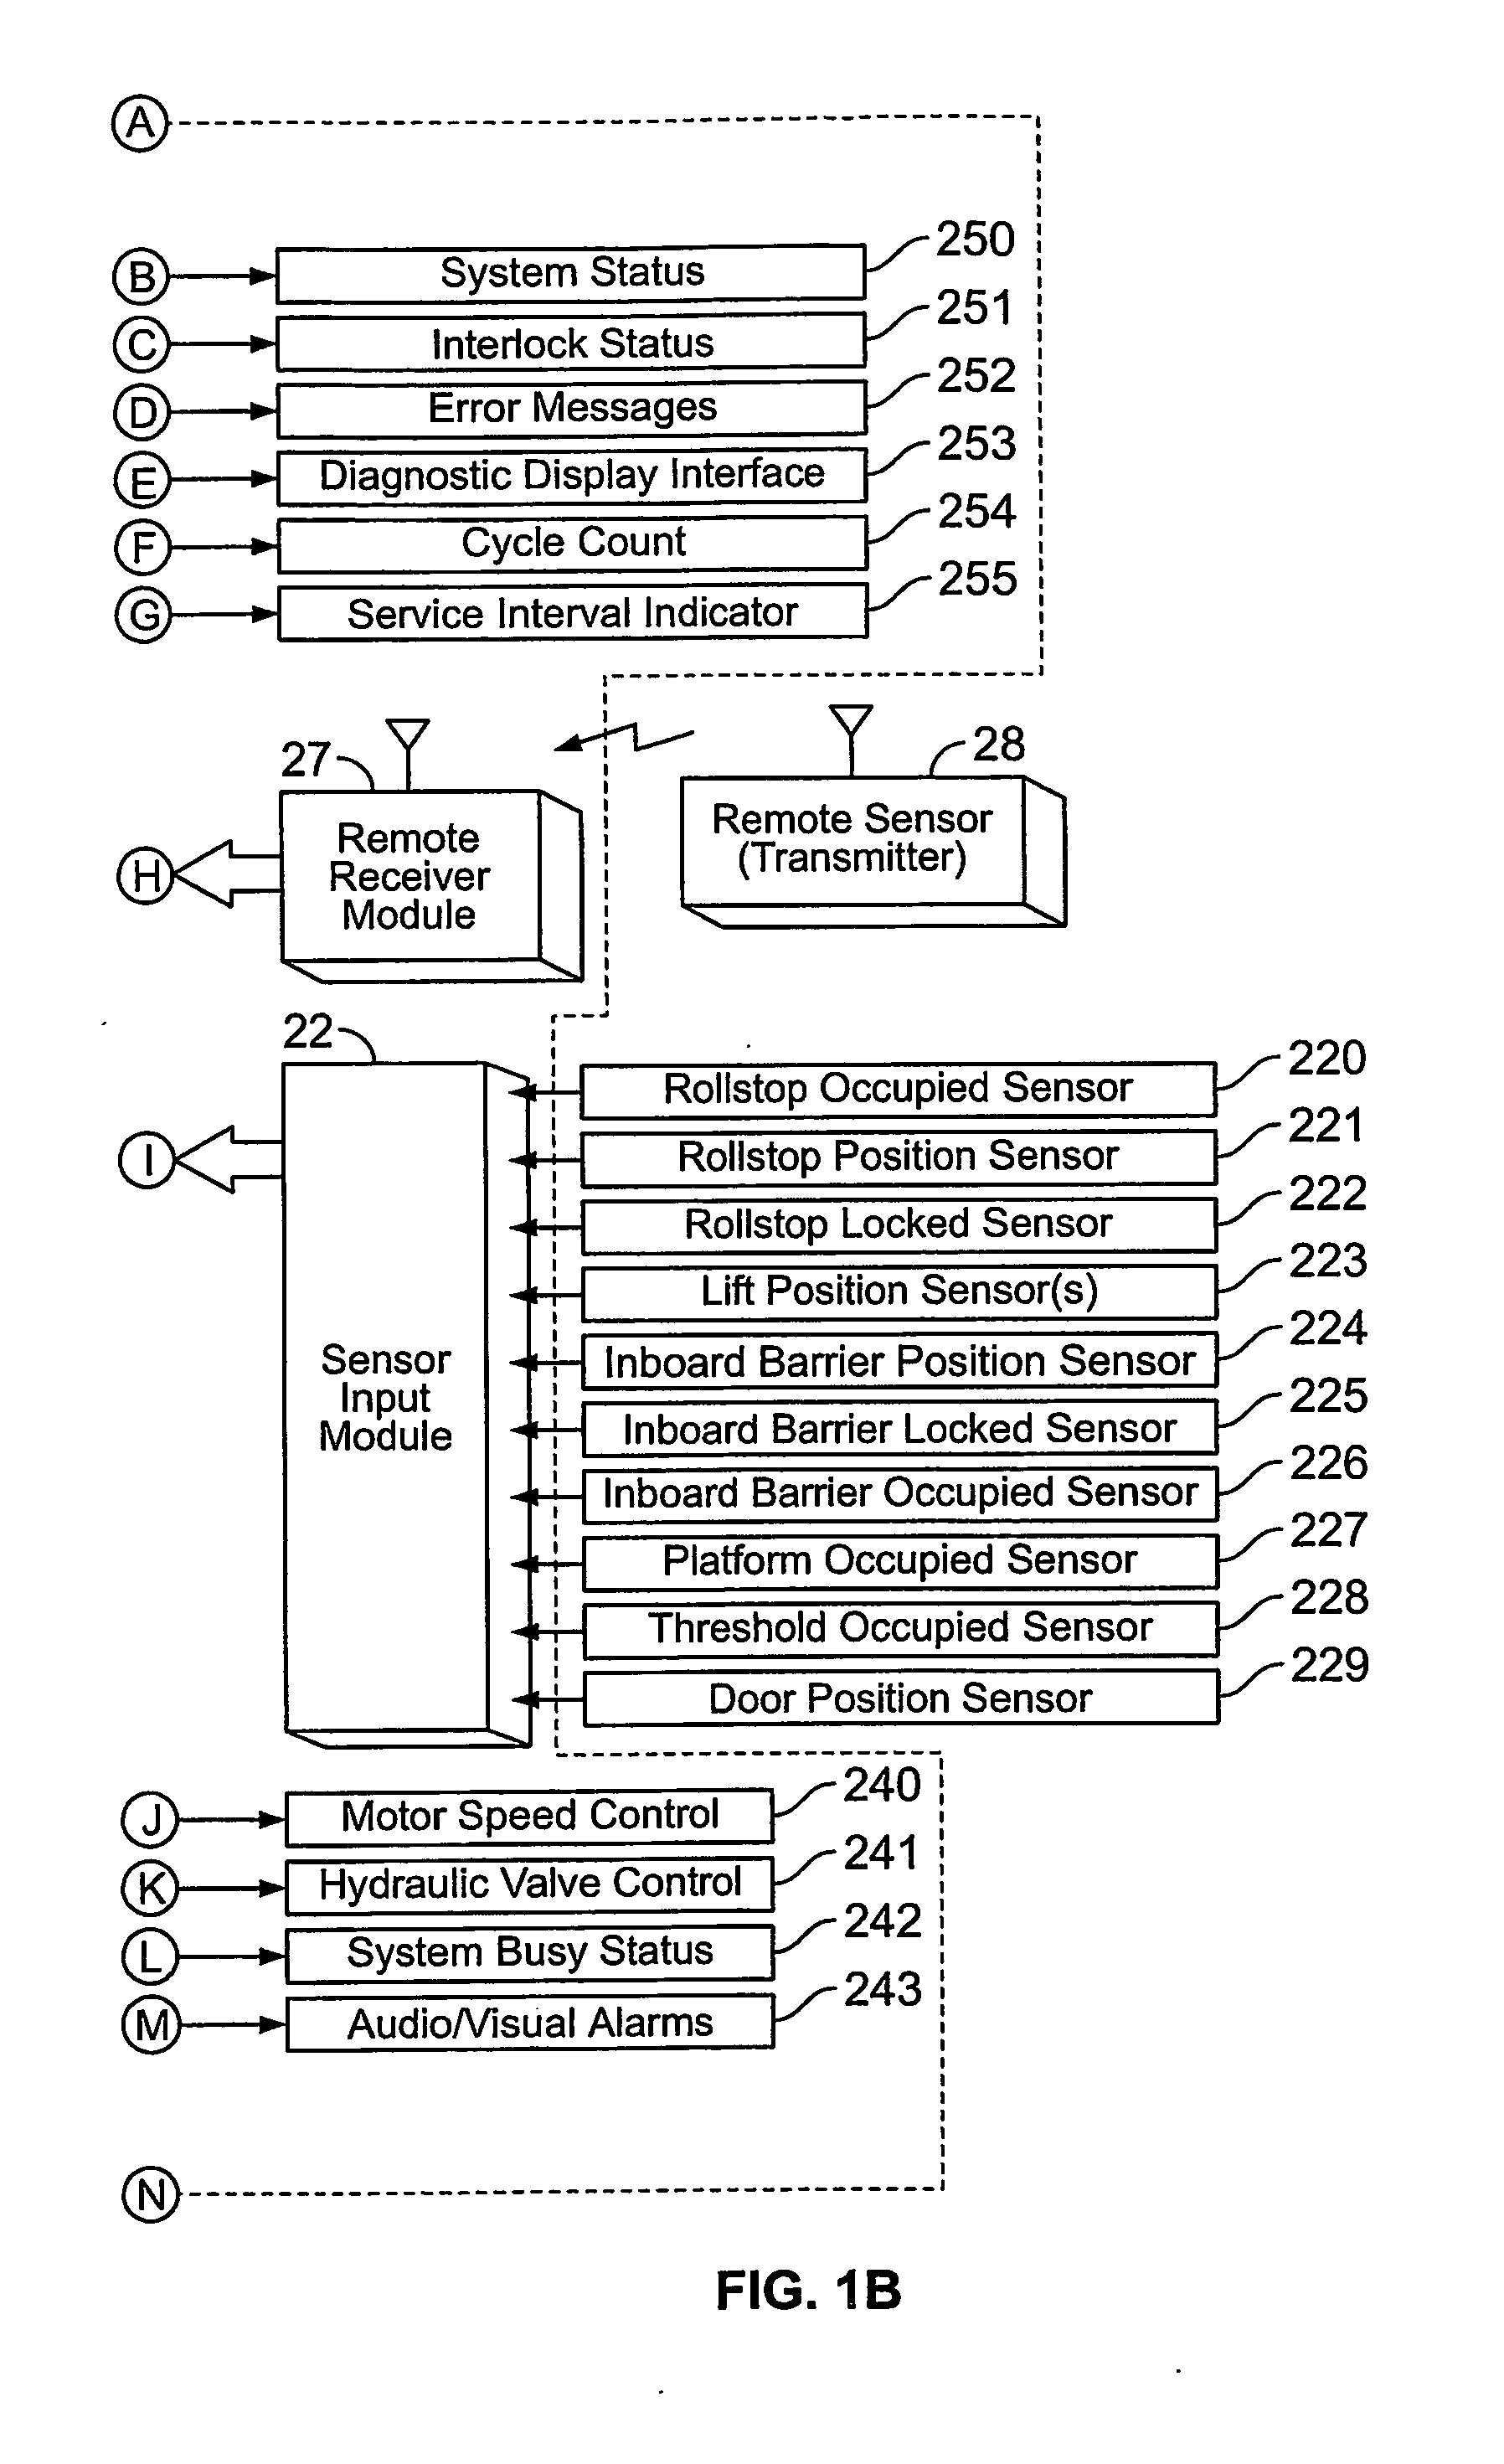 Electronic control system and method for an auxiliary device interlock safety system